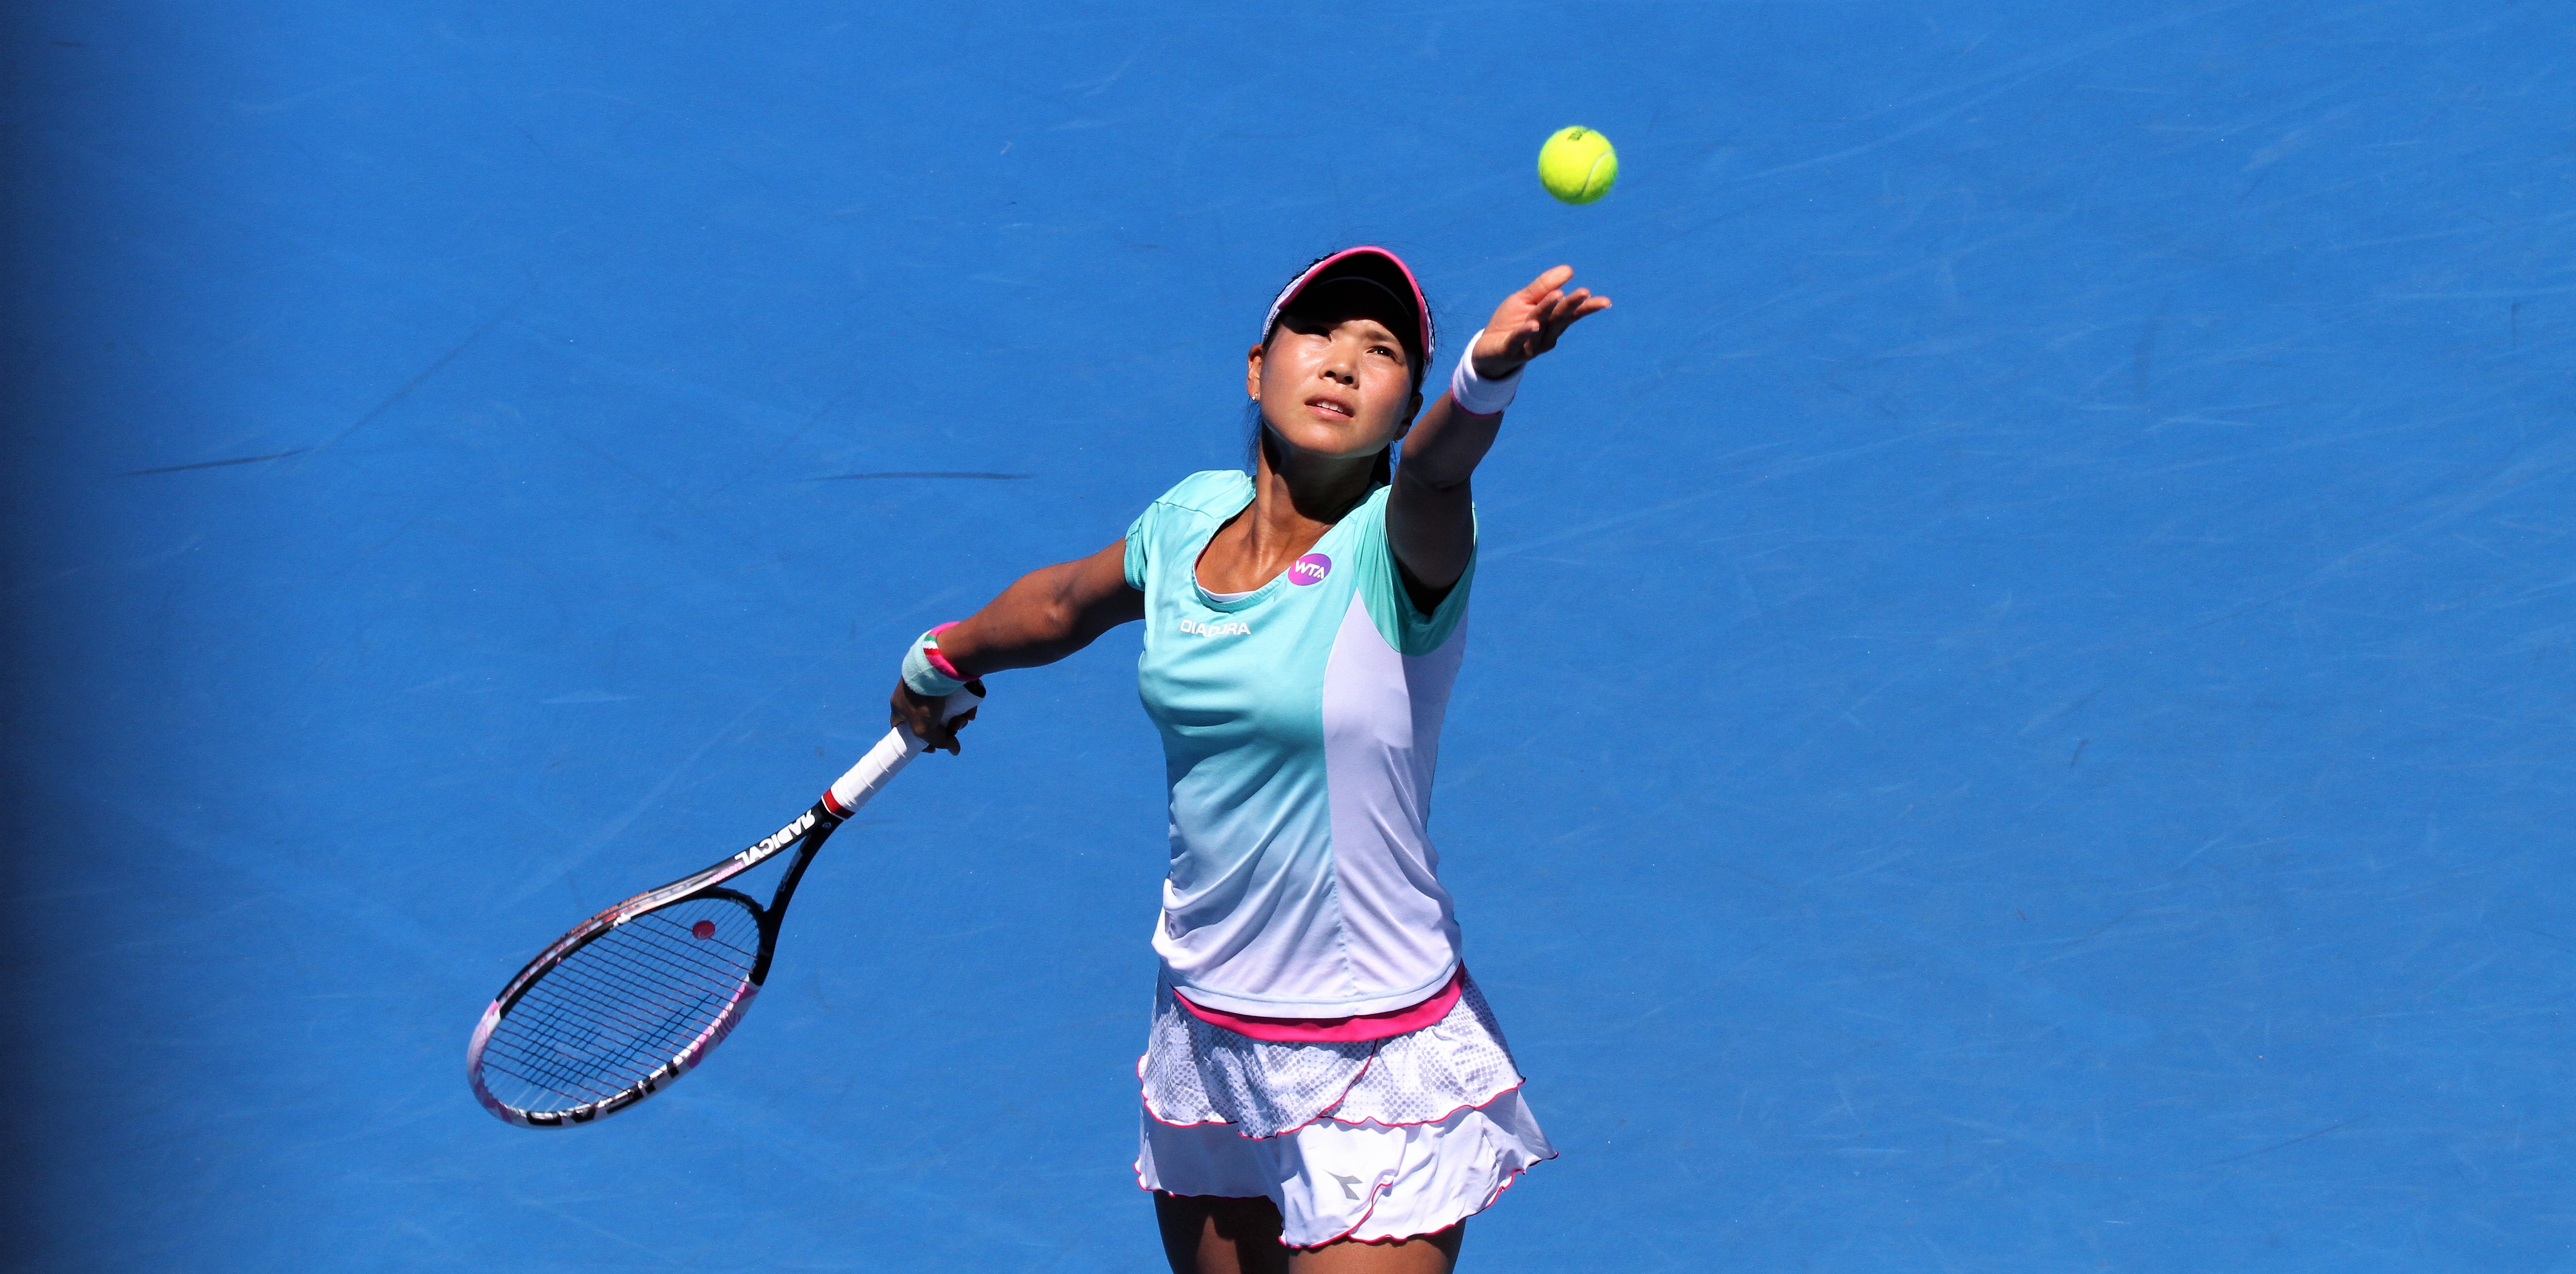 ON SERVE: Japan's Risa Ozaki continued her impressive form, moving into the final qualifying round.